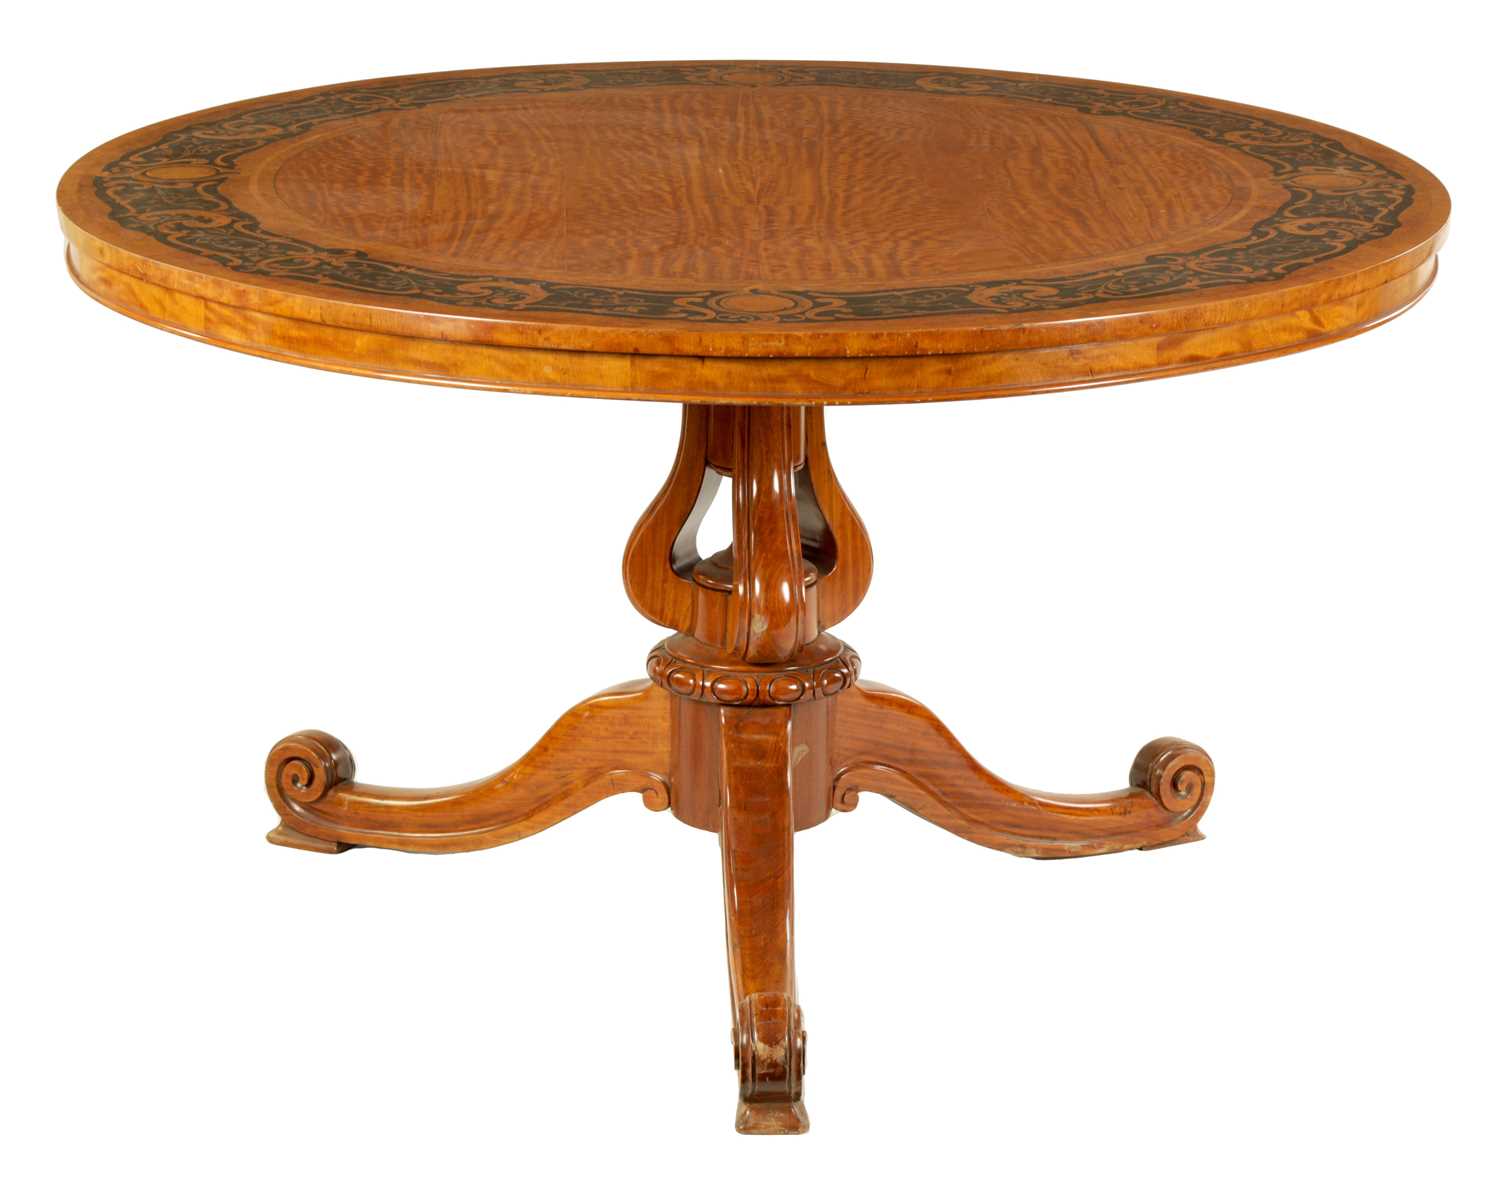 A FINE MID 19TH CENTURY FIGURED SATINWOOD MARQUETRY INLAID CENTRE TABLE - Image 2 of 8